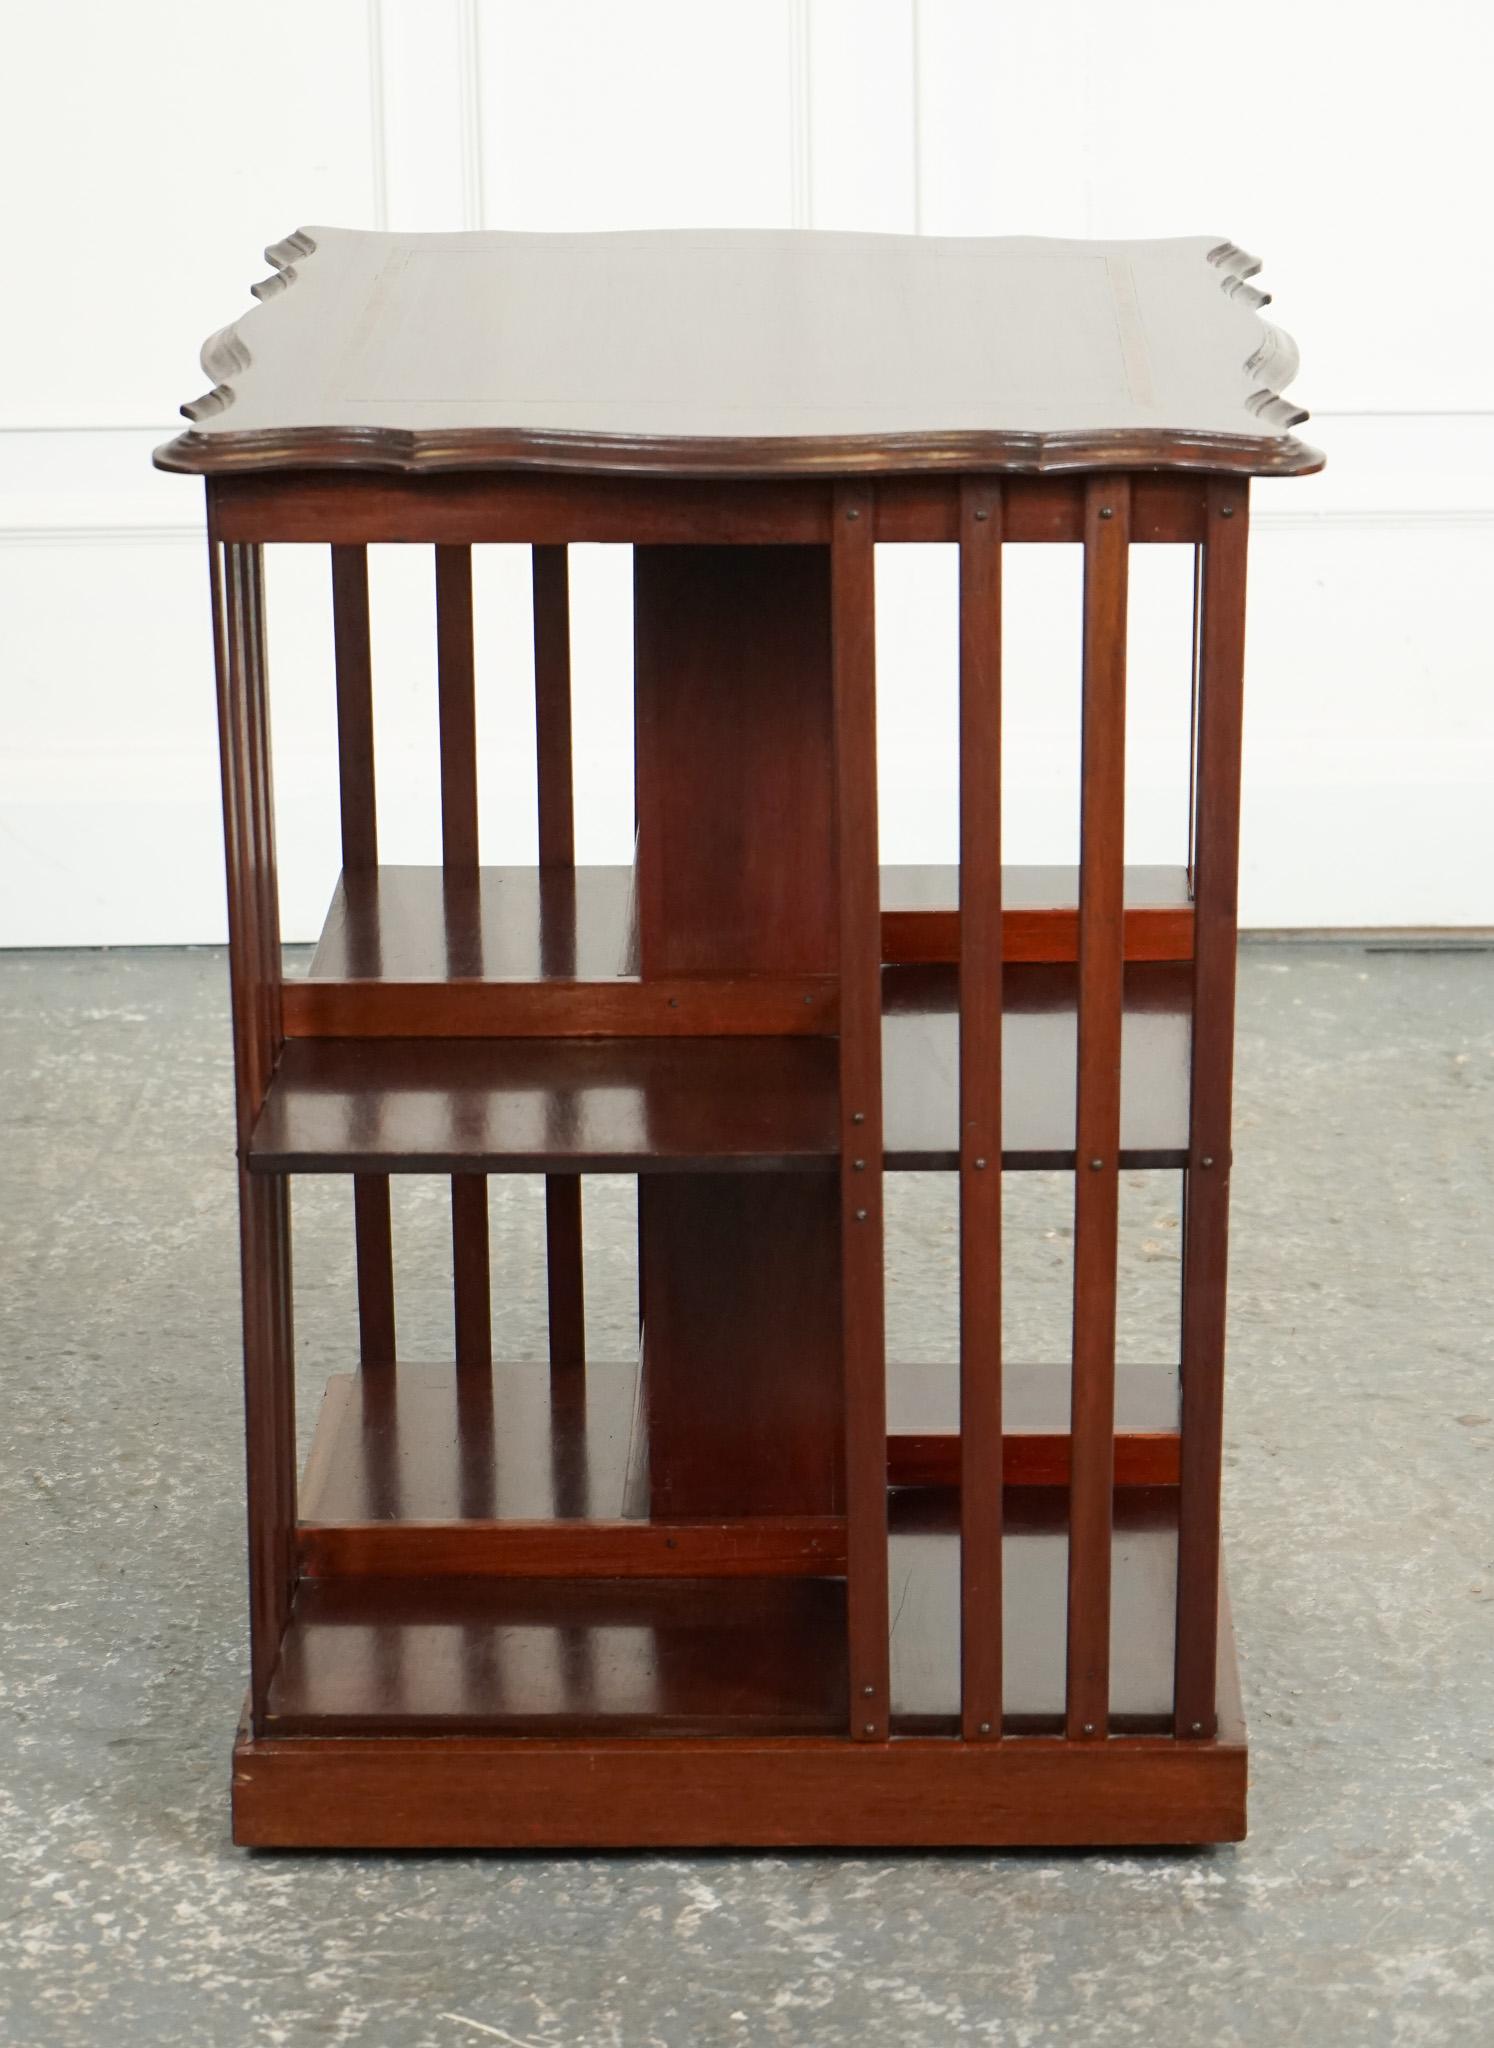 Hand-Crafted ANTIQUE EDWARDIAN REVOLVING BOOKCASE WITH A SERPENTiNE SHAPED TOP For Sale